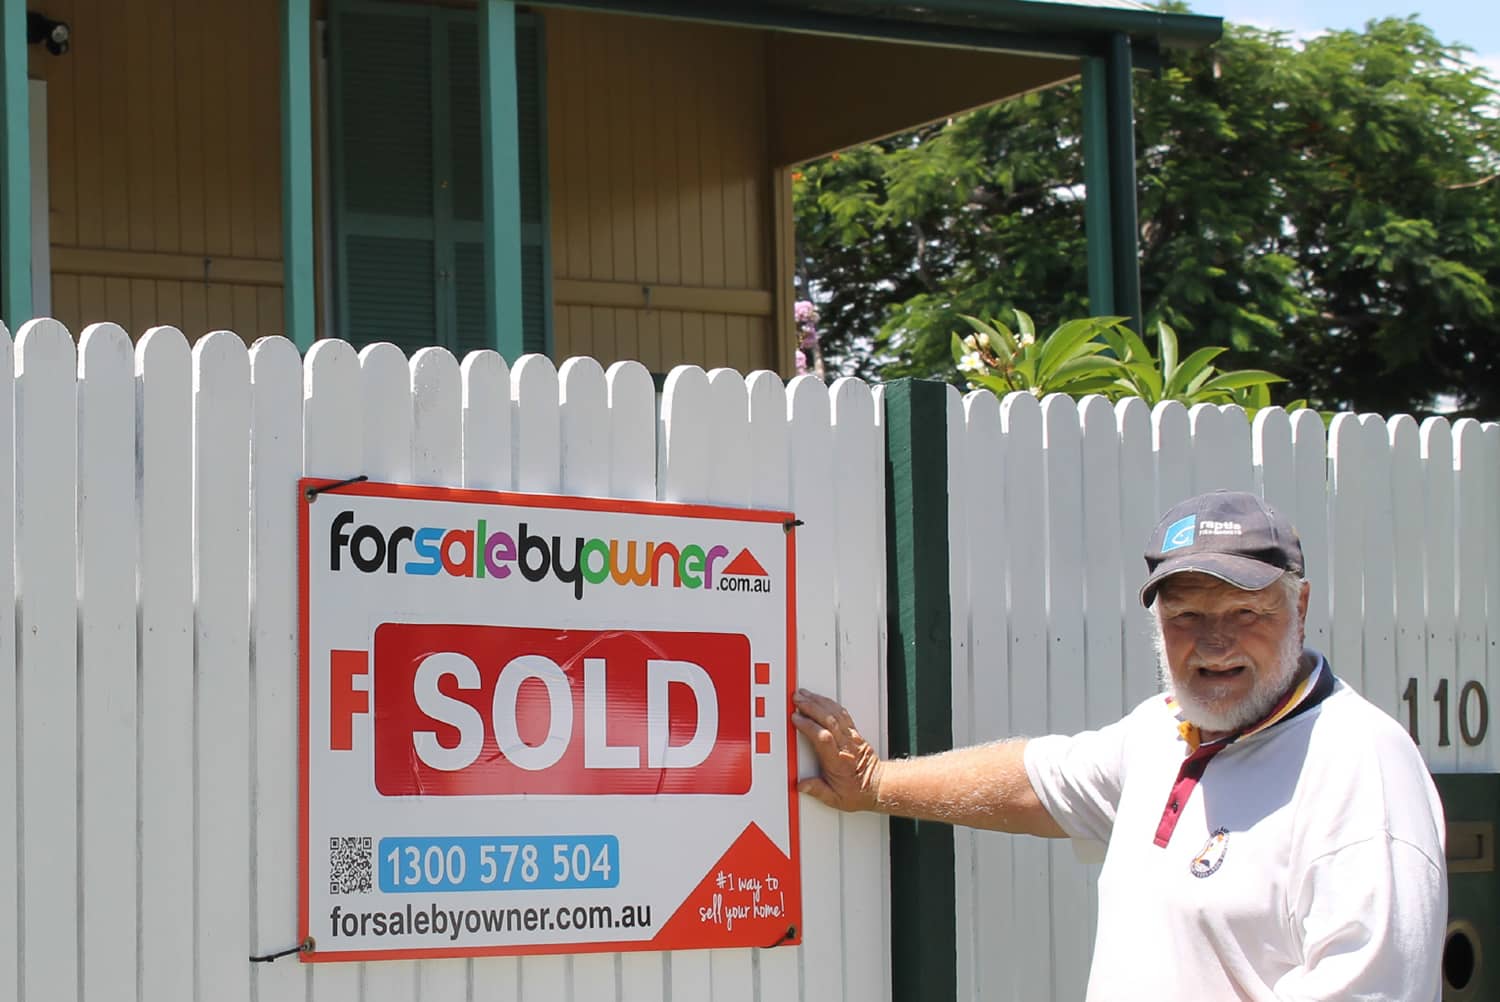 Sell Property Without an Agent in the Northern Territory